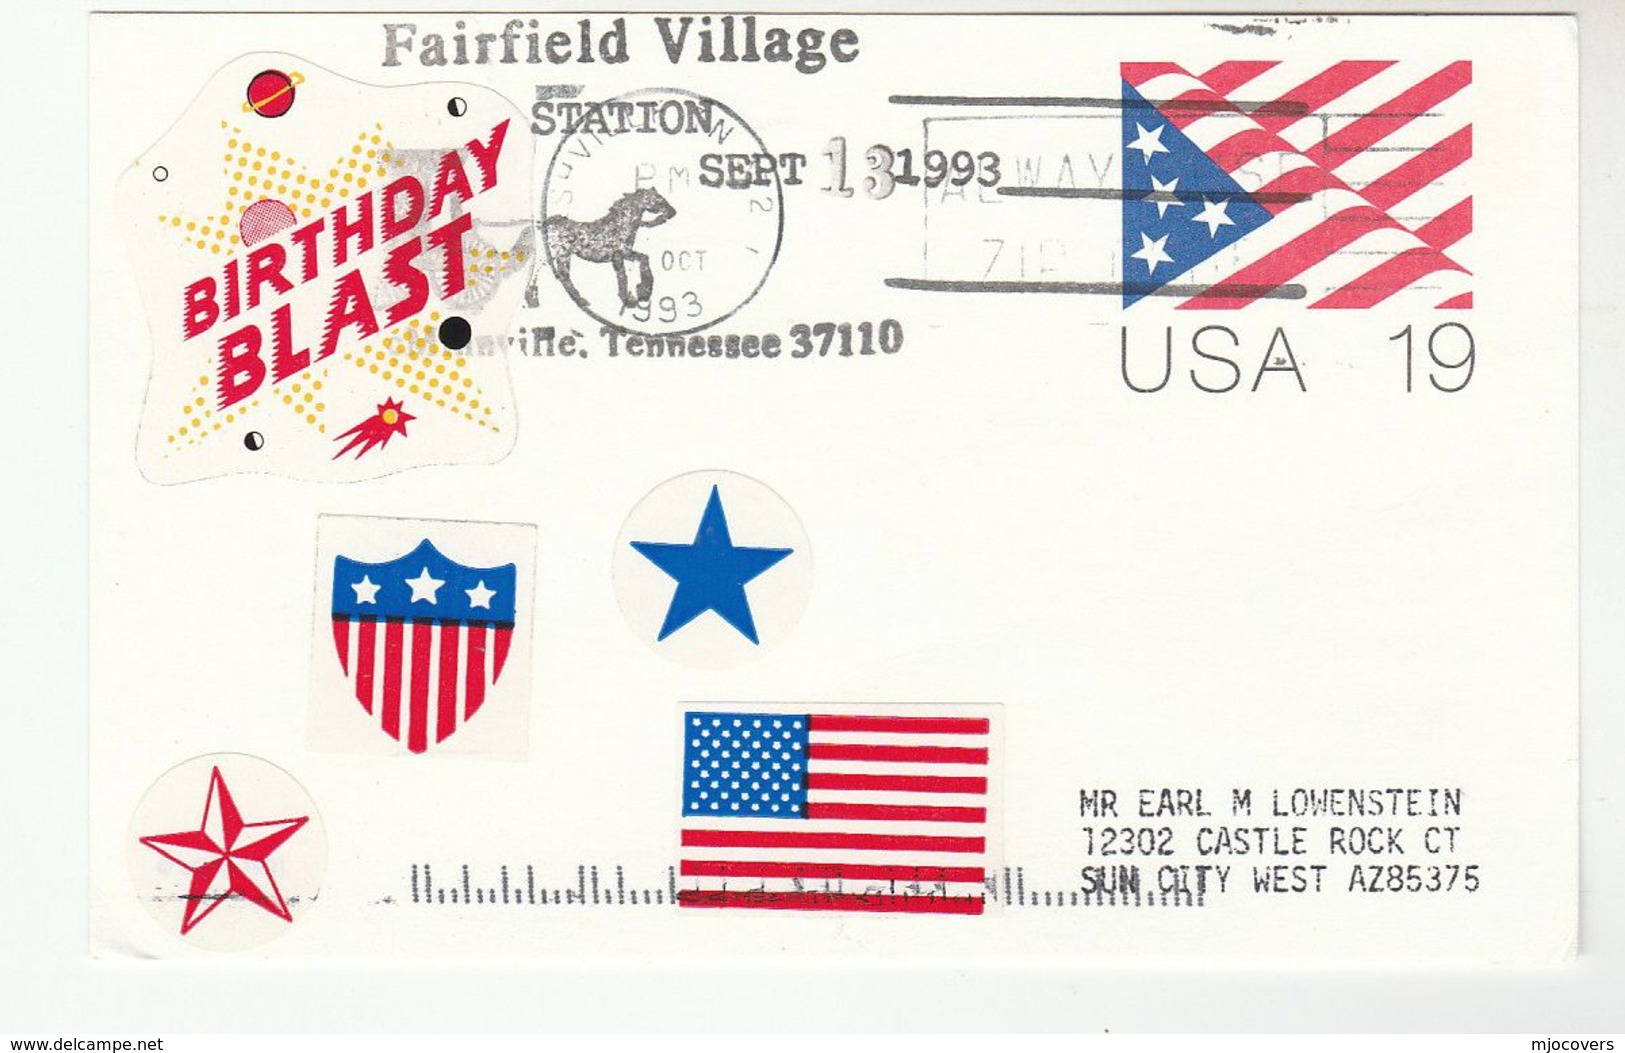 1993 FAIRFIED VILLAGE HORSE EVENT COVER Postal STATIONERY CARD Usa Stamps Horses - Horses